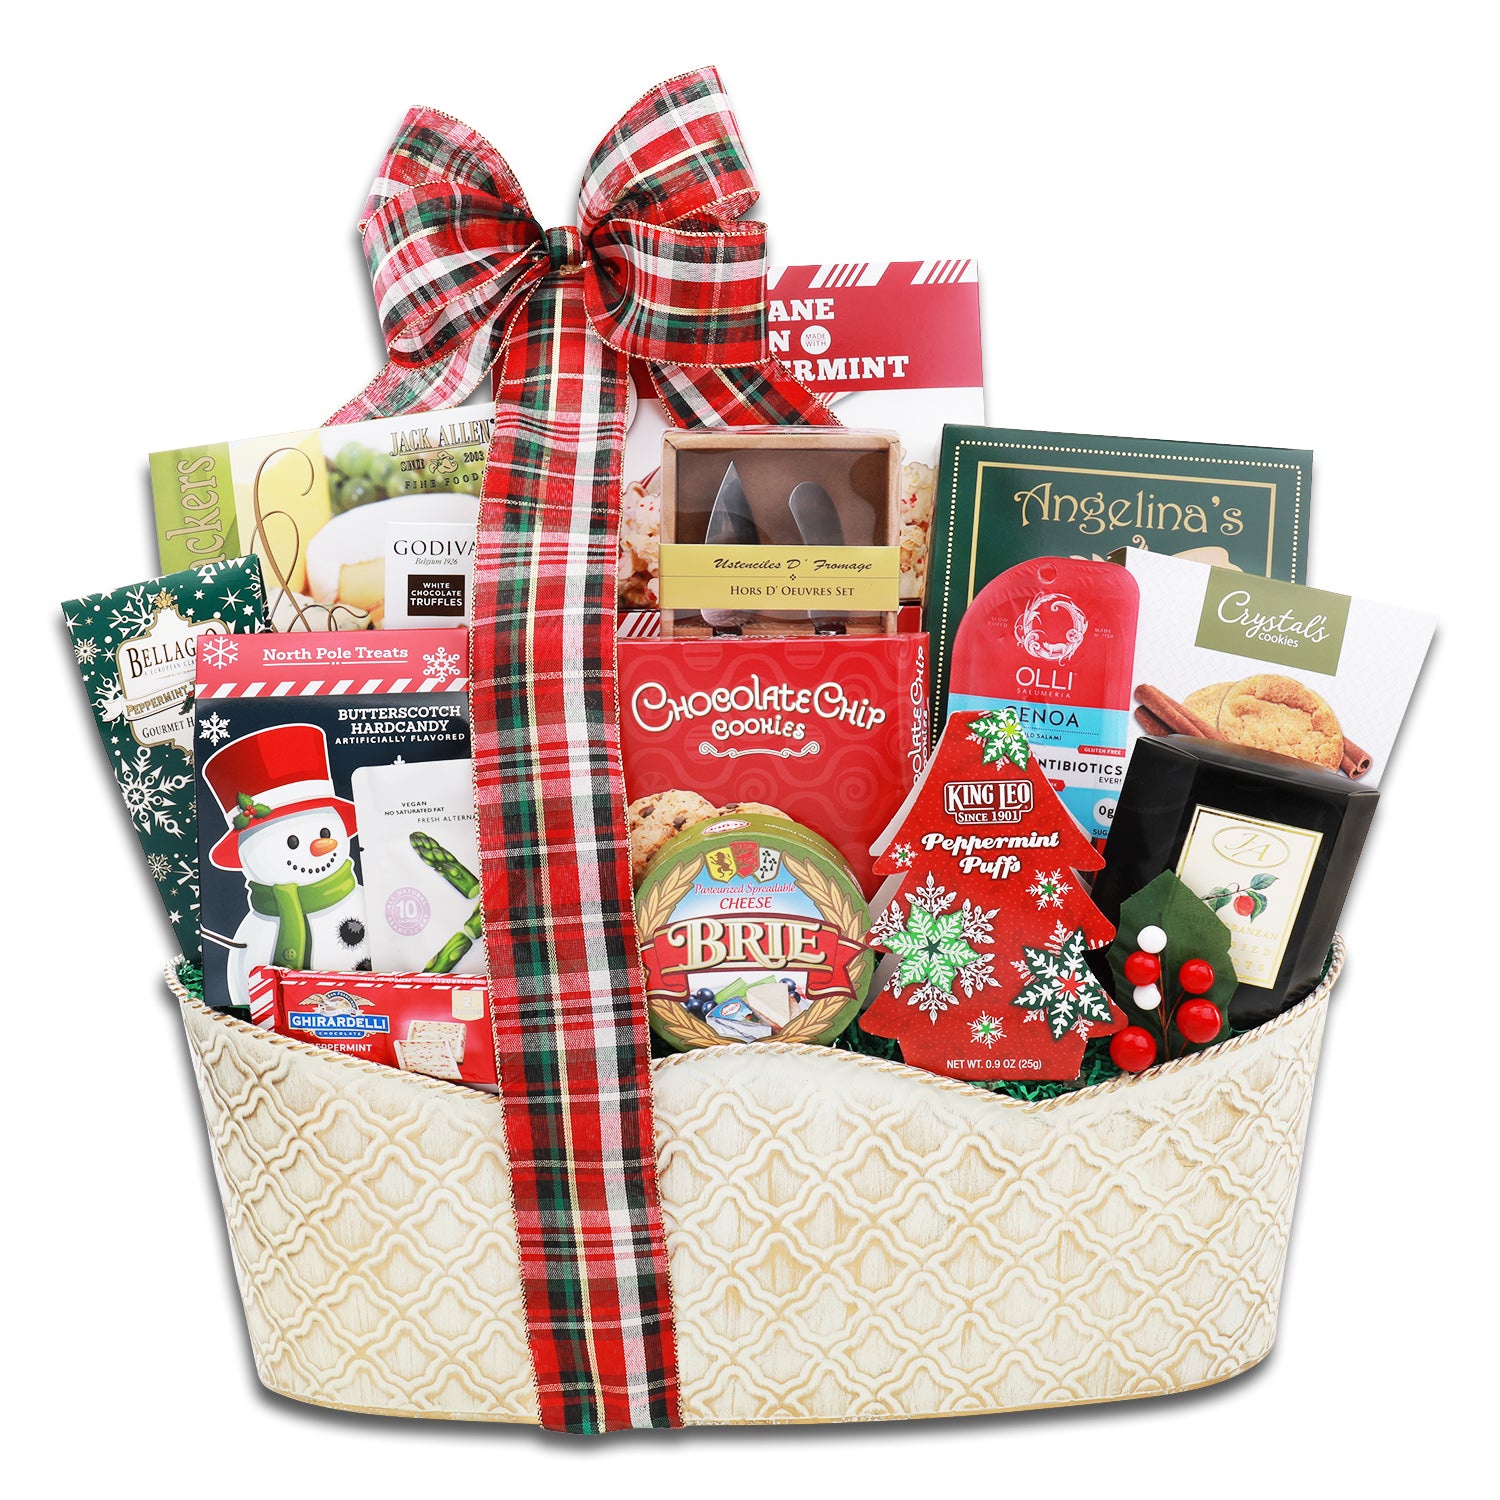 Gift basket contents in red and green packaging arranged in reusable Large Cream Metal Basket with red, green, and white plaid bow. 